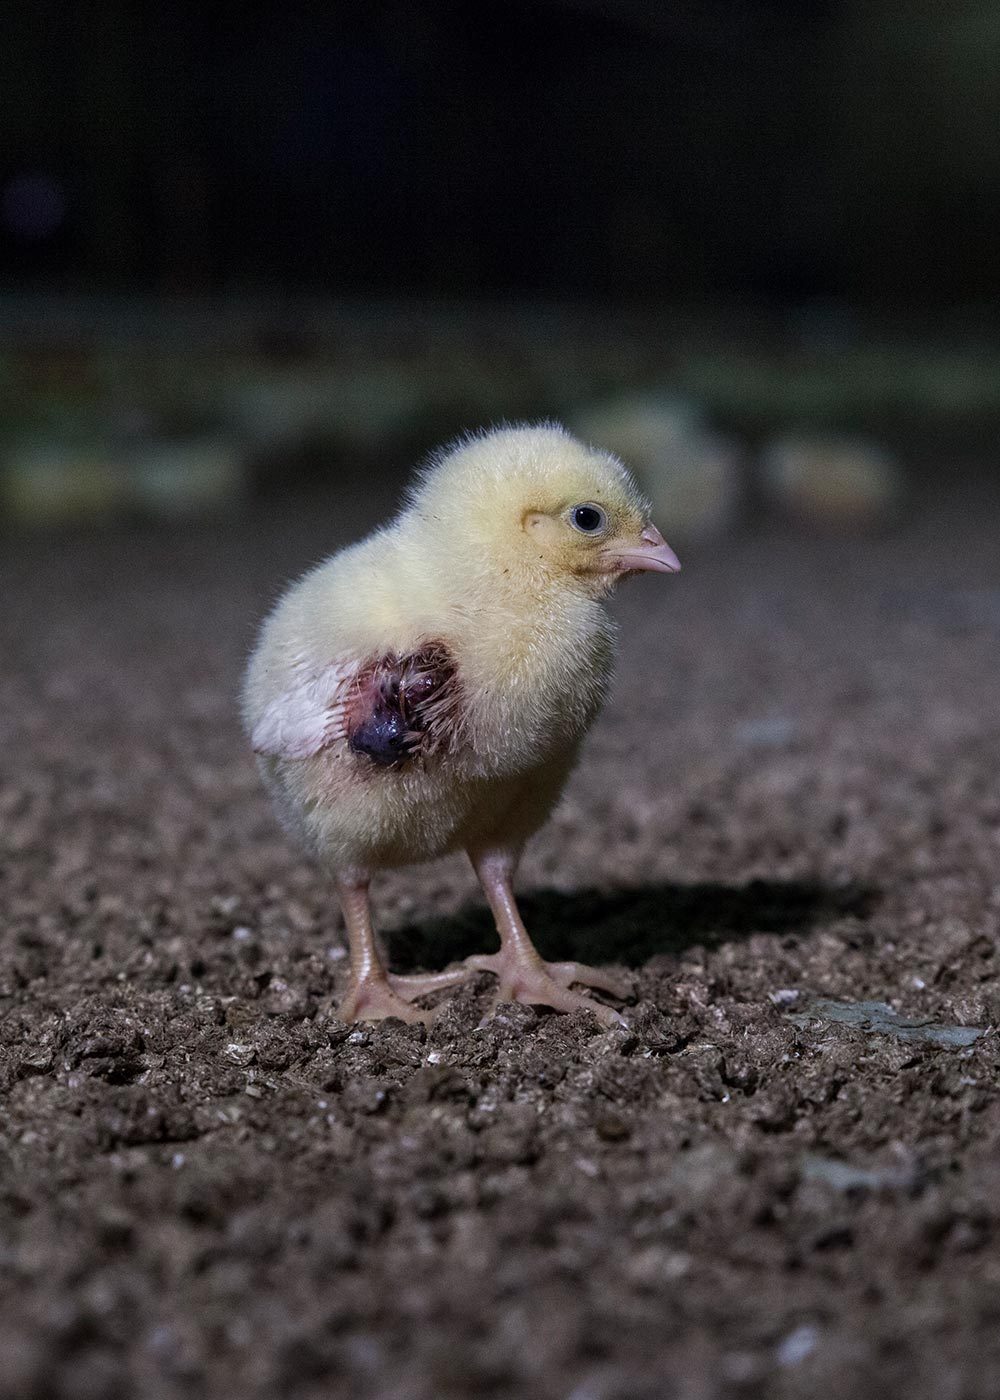 Injured baby chick in a factory farm